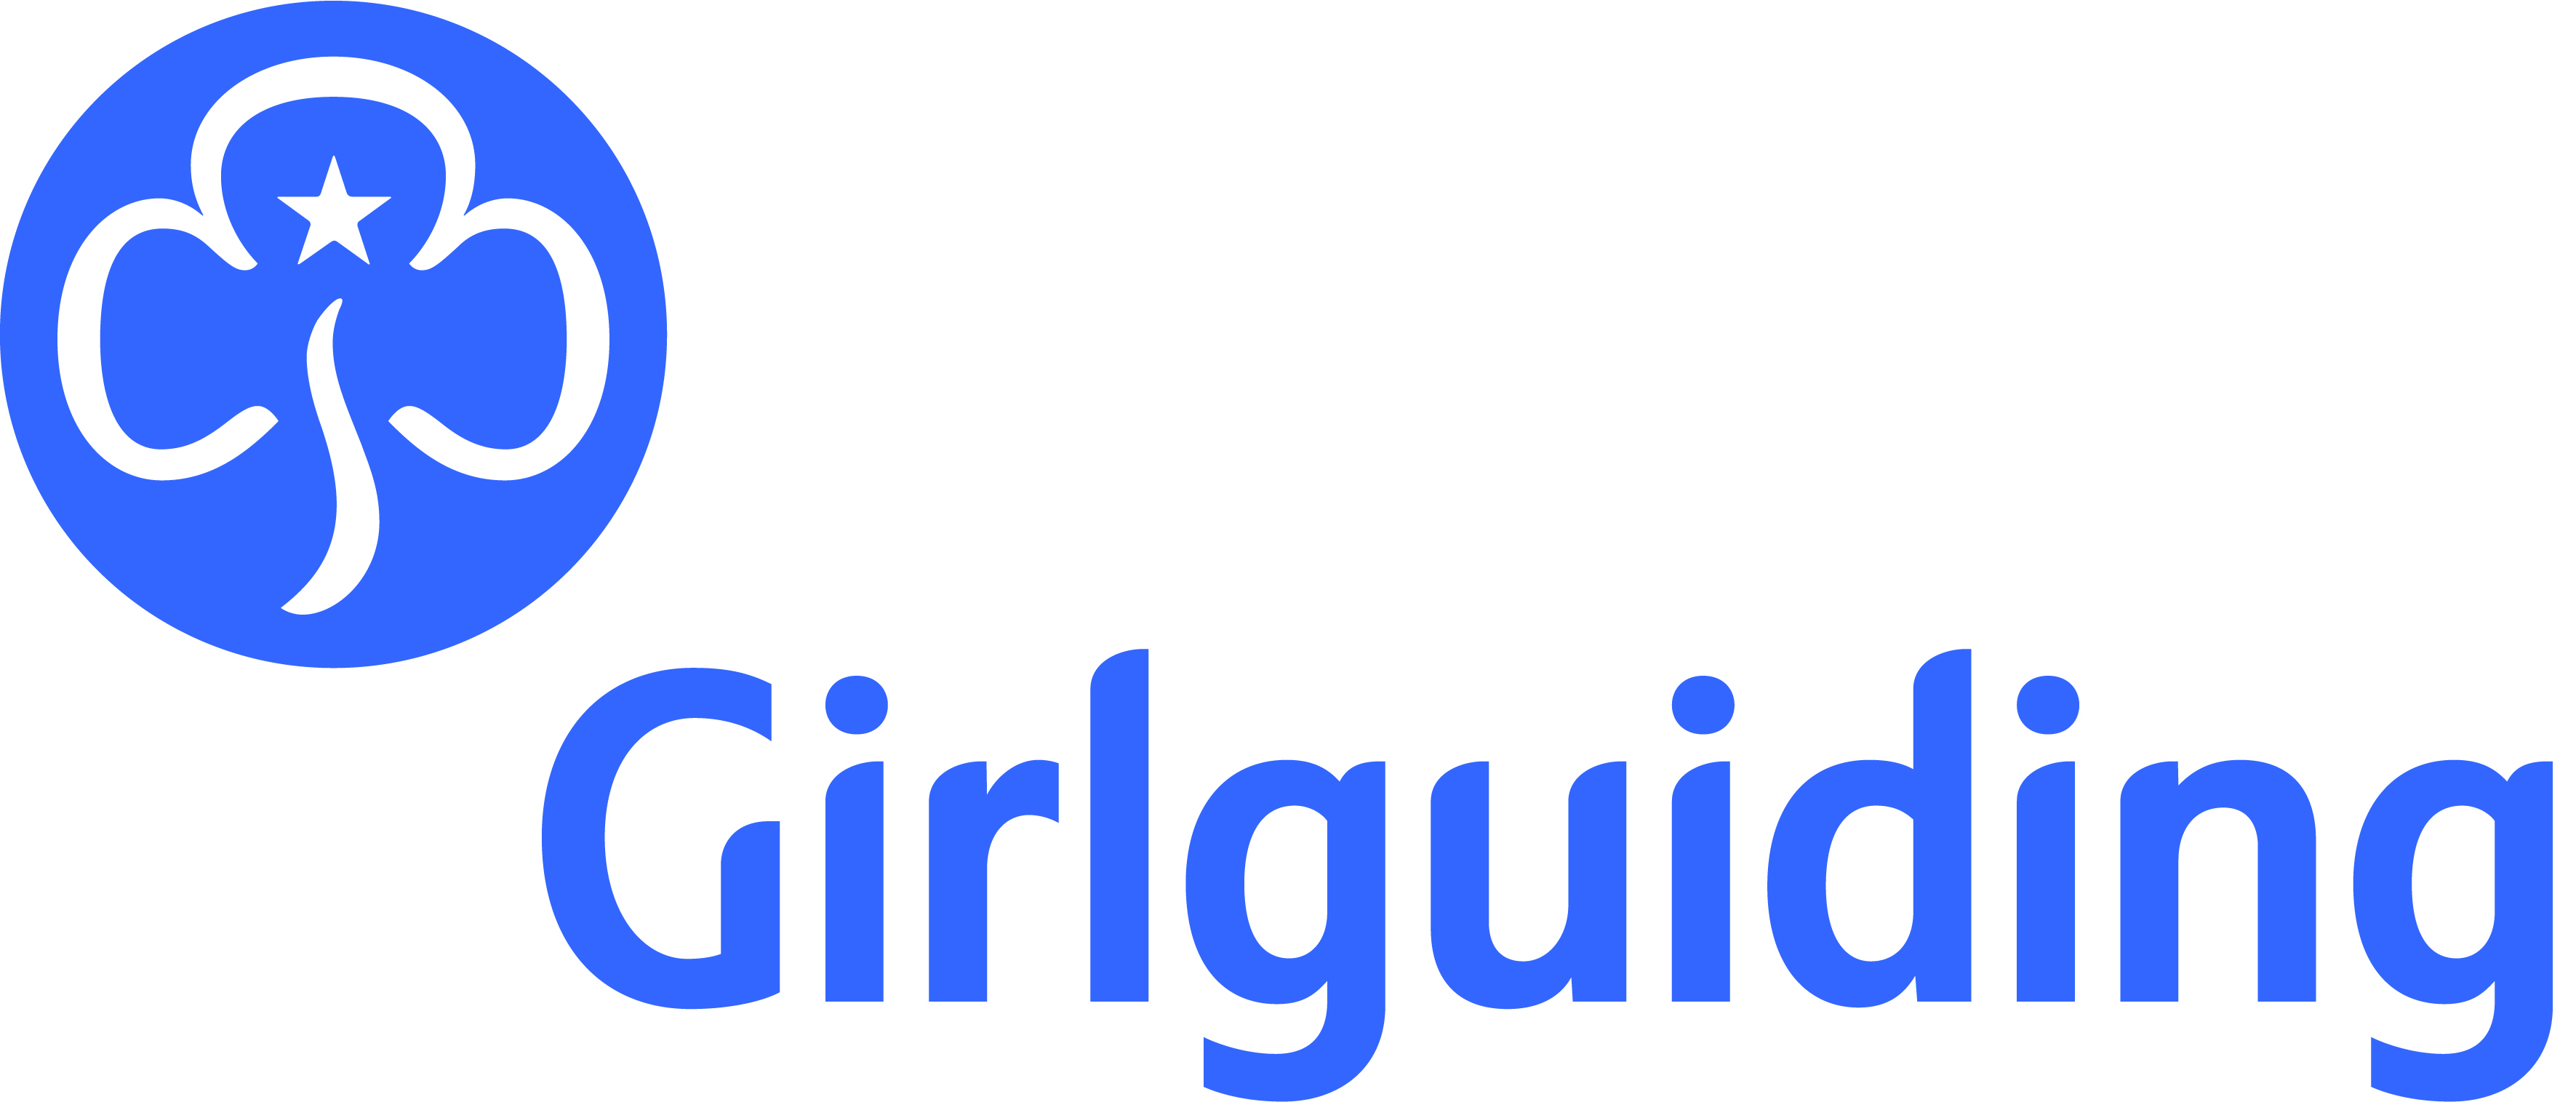 girl guides clipart - photo #49